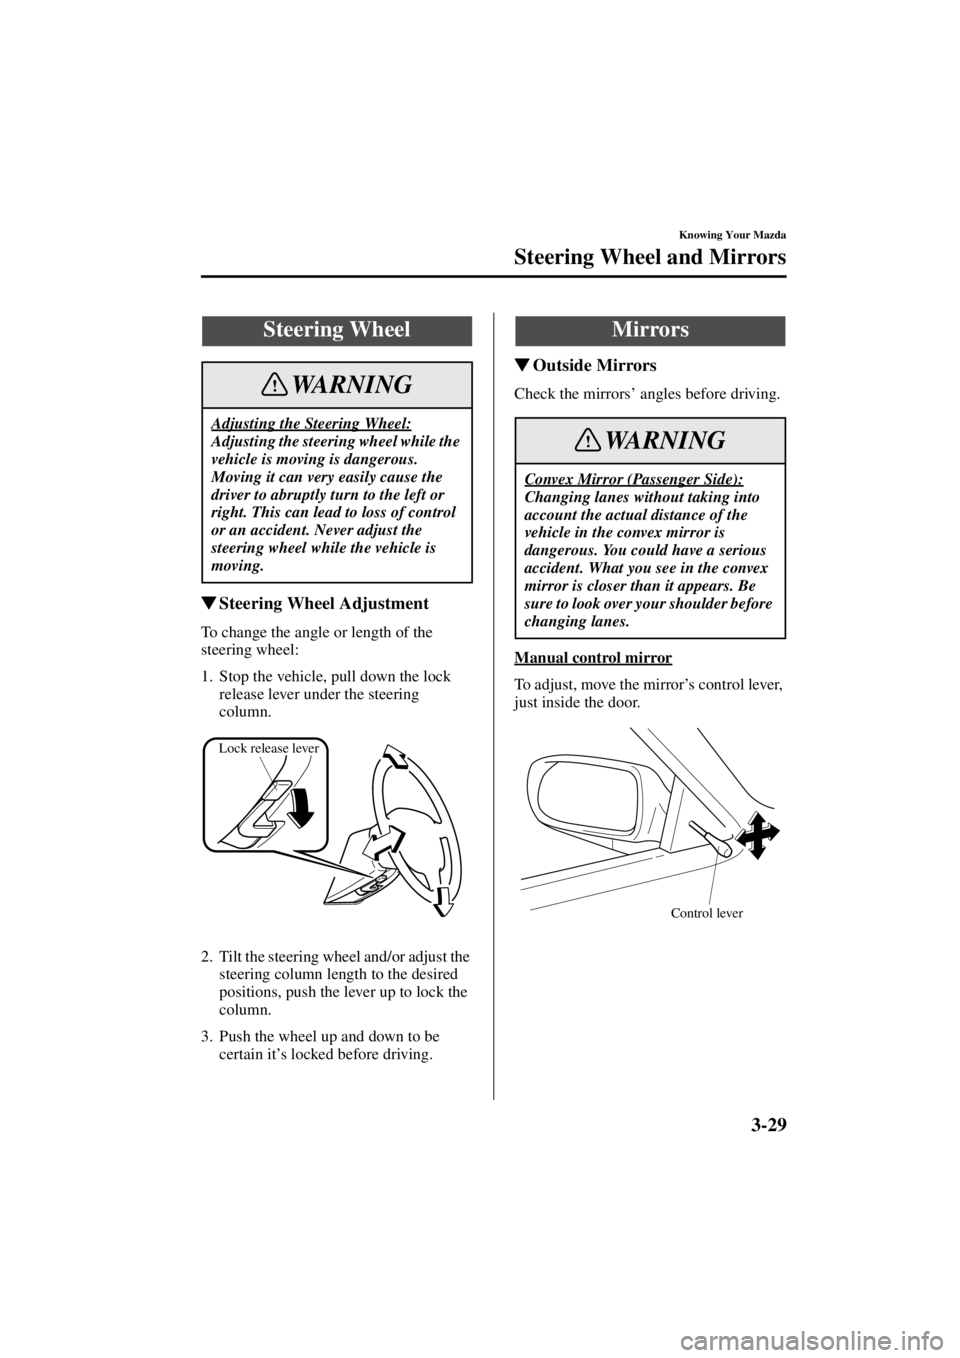 MAZDA MODEL 3 5-DOOR 2004  Owners Manual 3-29
Knowing Your Mazda
Form No. 8S18-EA-03I
Steering Wheel and Mirrors
Steering Wheel Adjustment
To change the angle or length of the 
steering wheel:
1. Stop the vehicle, pull down the lock 
releas